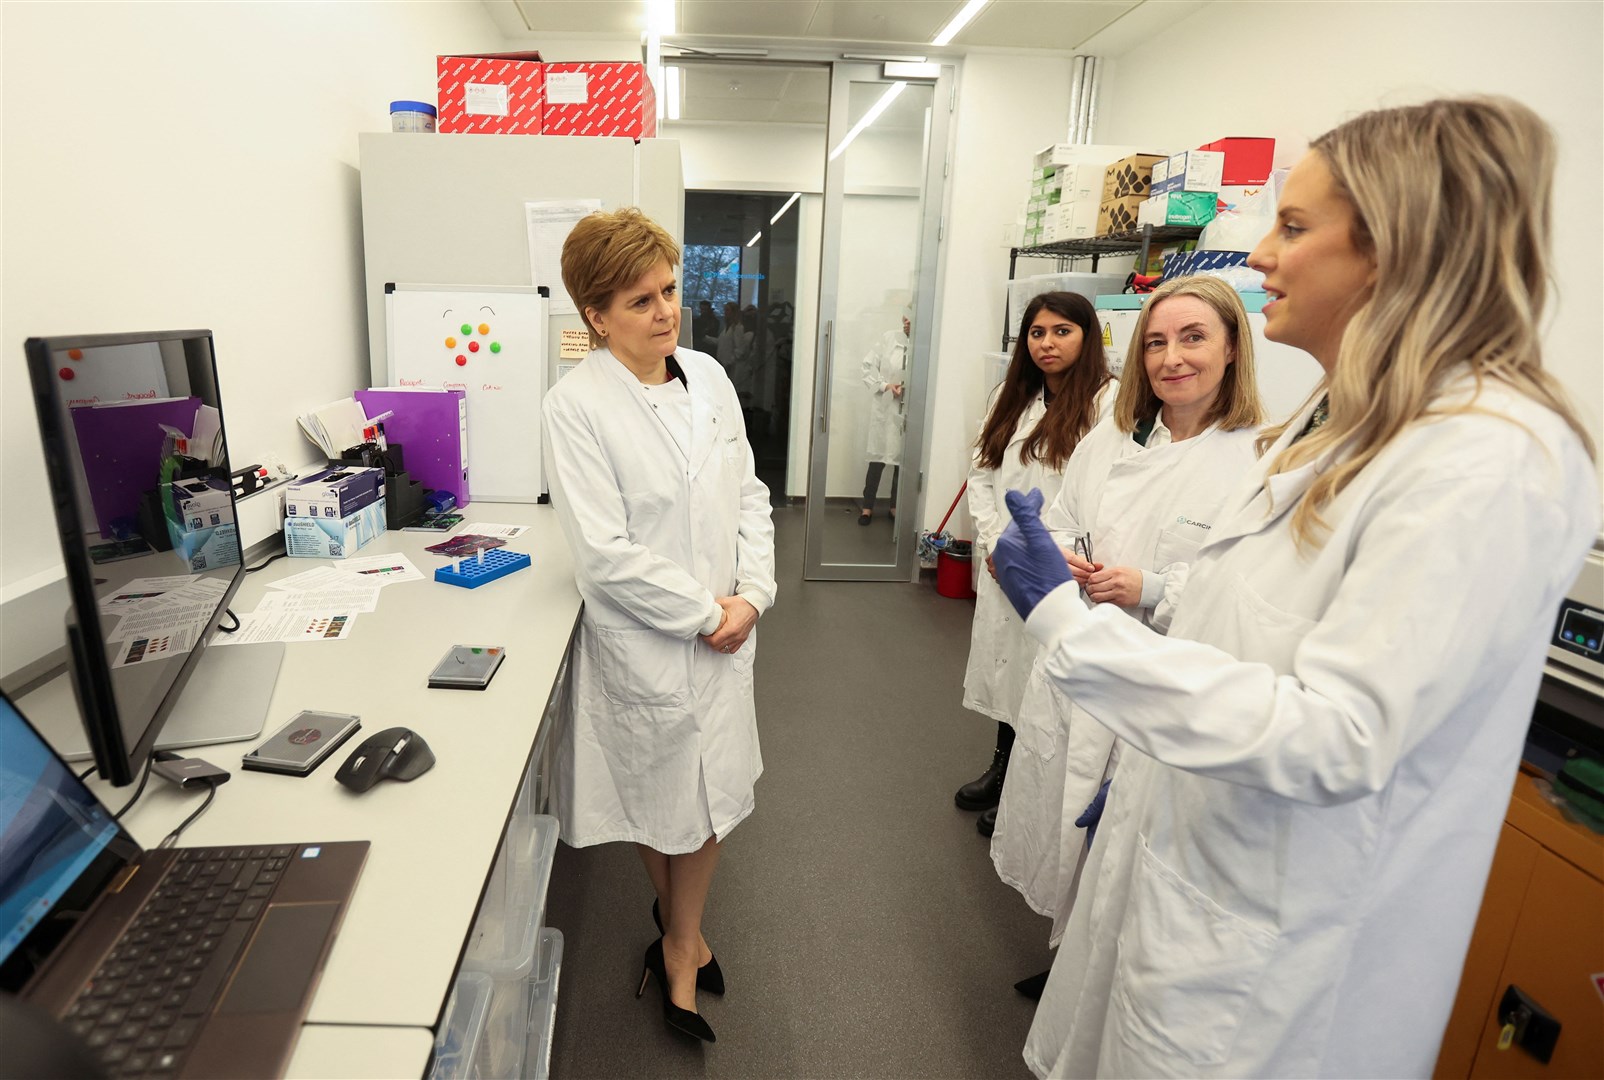 Nicola Sturgeon said the race should be ‘thoroughly positive’ (Russell Cheyne/PA)